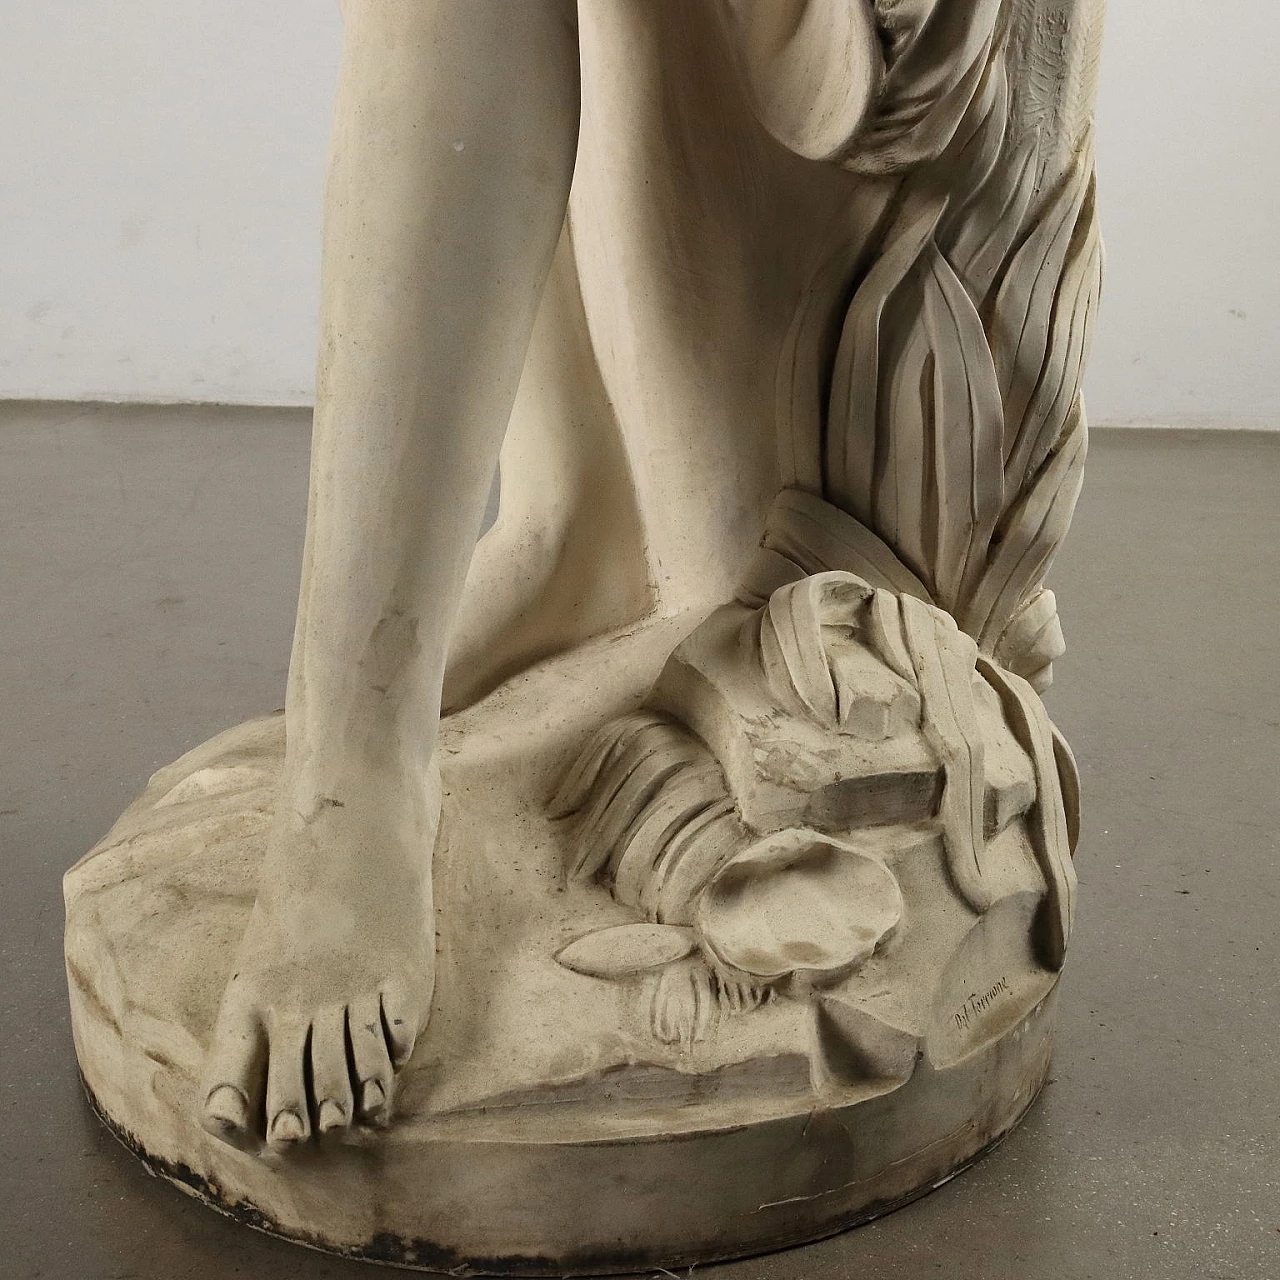 Dal Torrione, The bather, sythetic marble sculpture 8